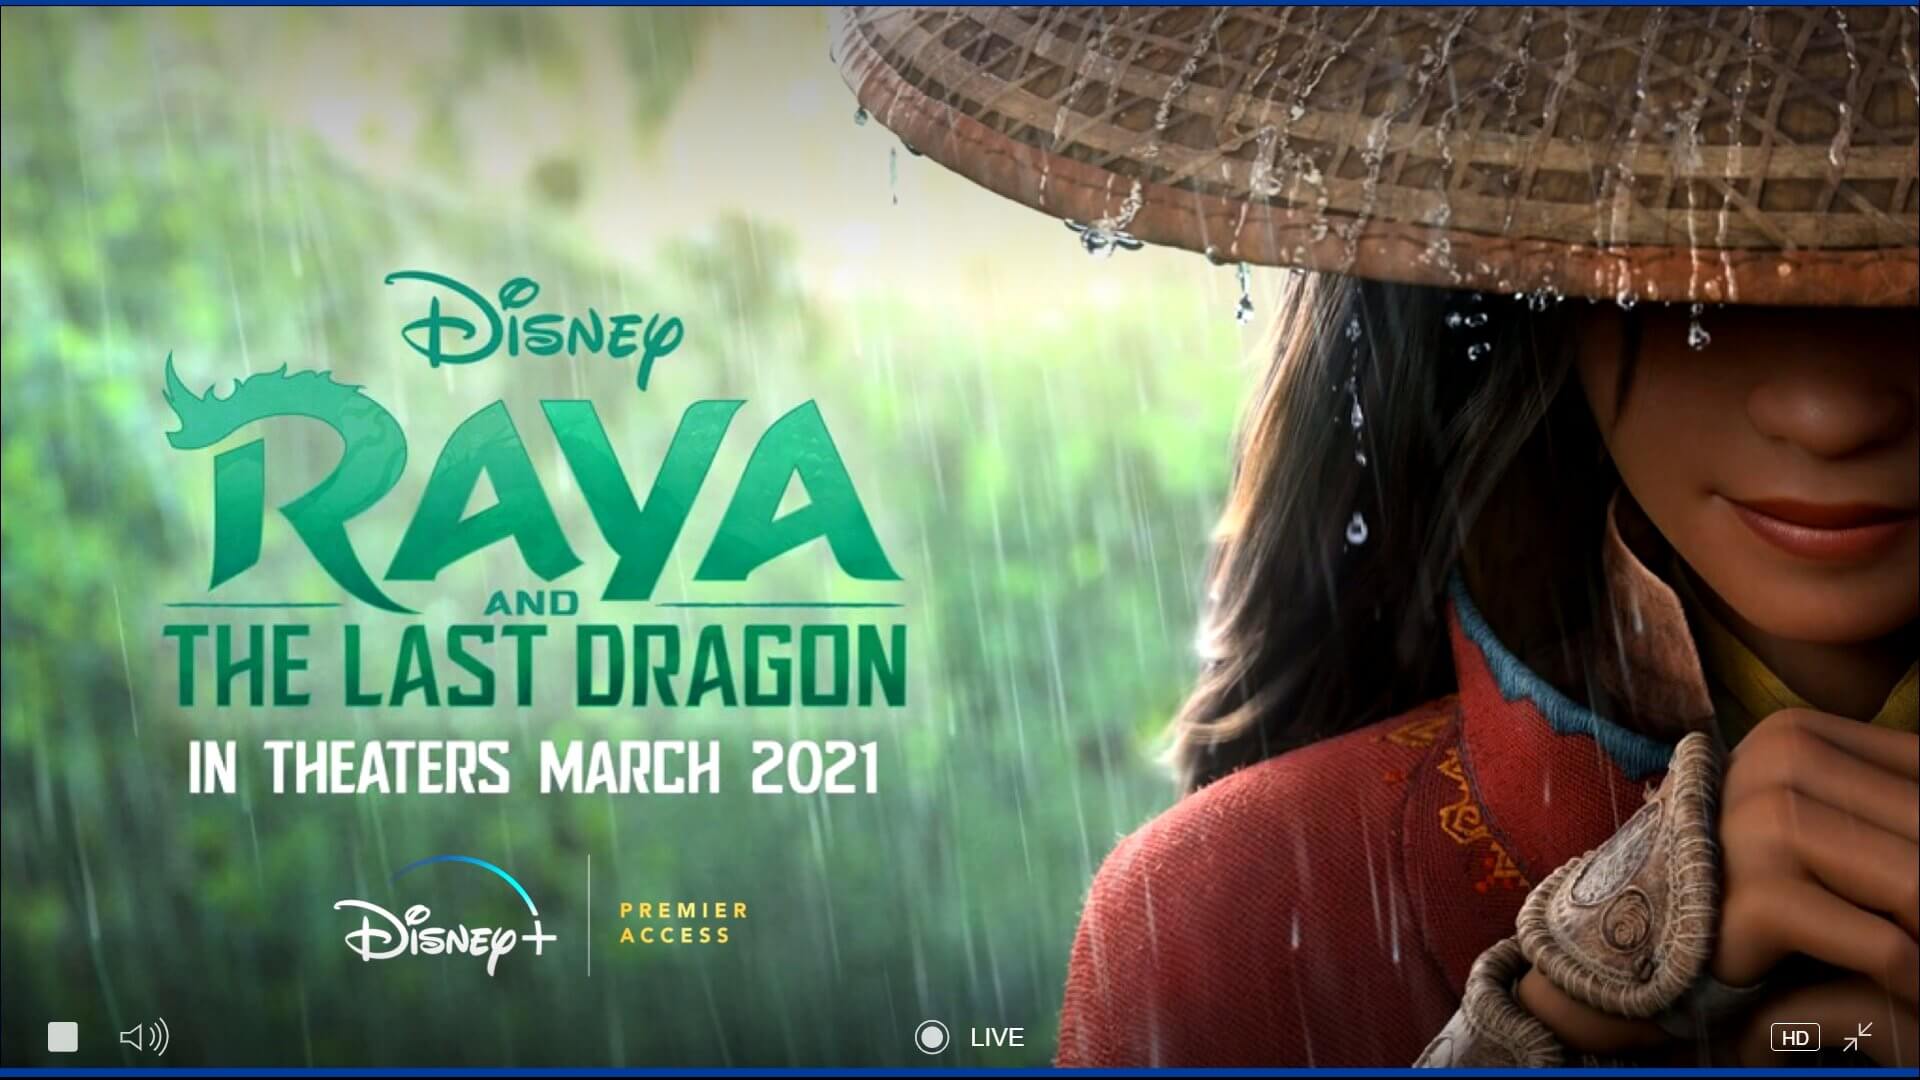 ‘Raya and the Last Dragon’ Hitting Theaters and Disney+ With Premier Access